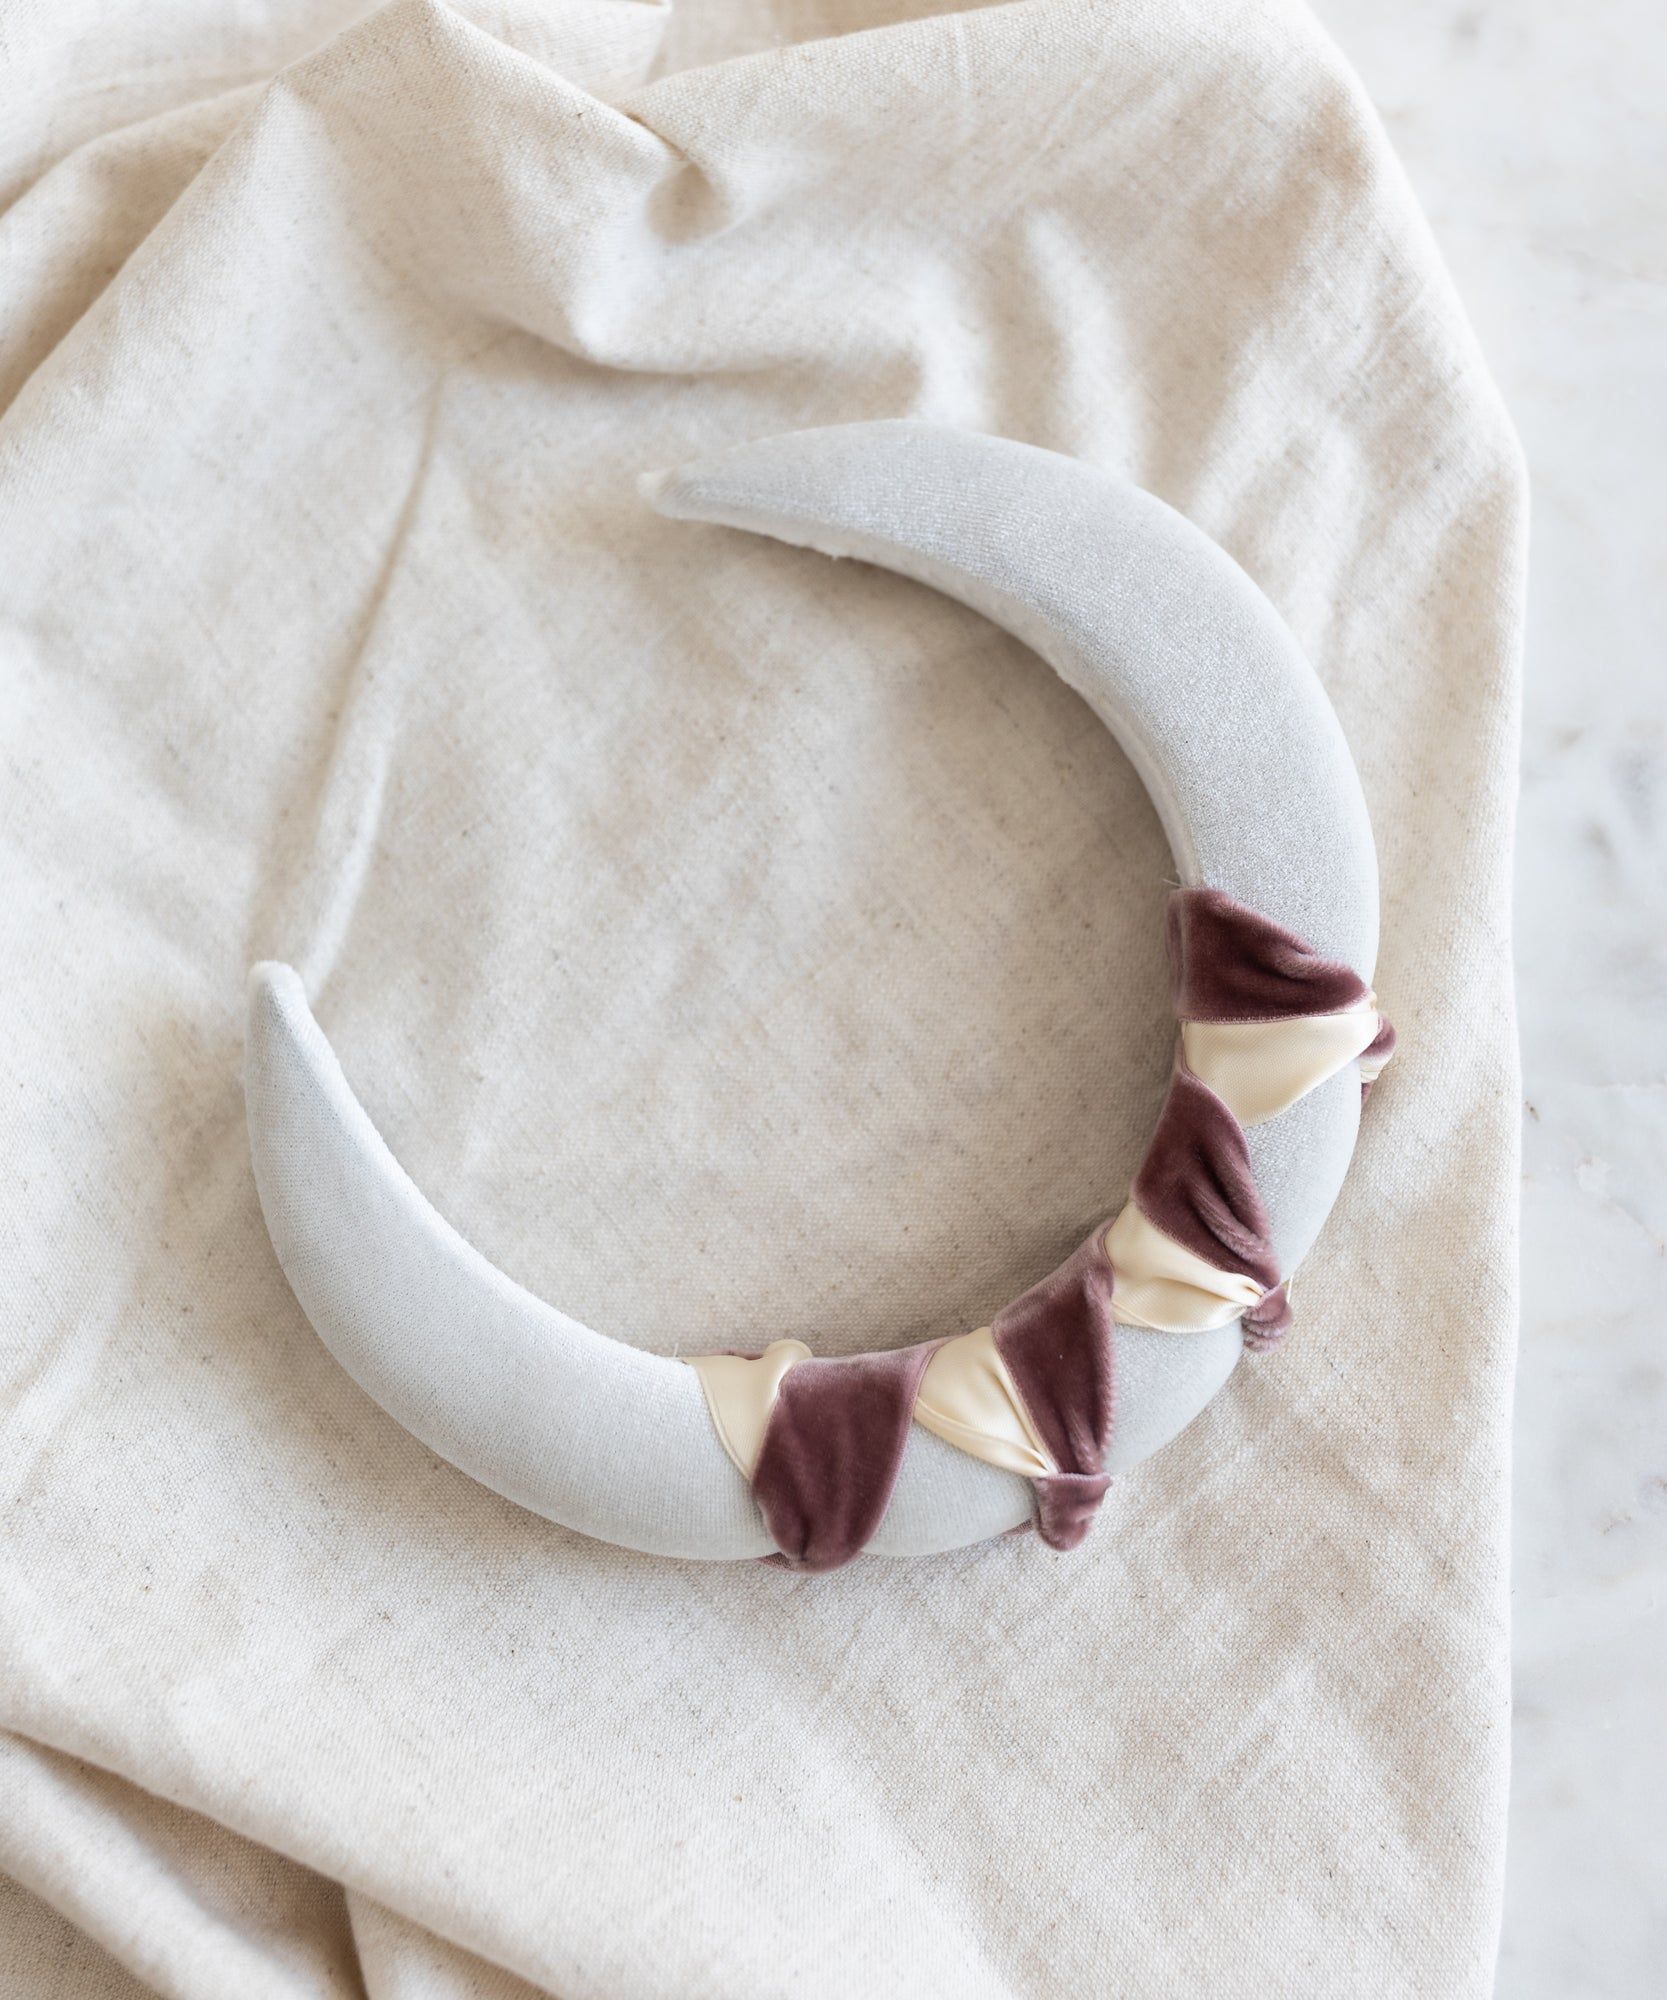 A Headband Knot White necklace by WALD Berlin on a white cloth.